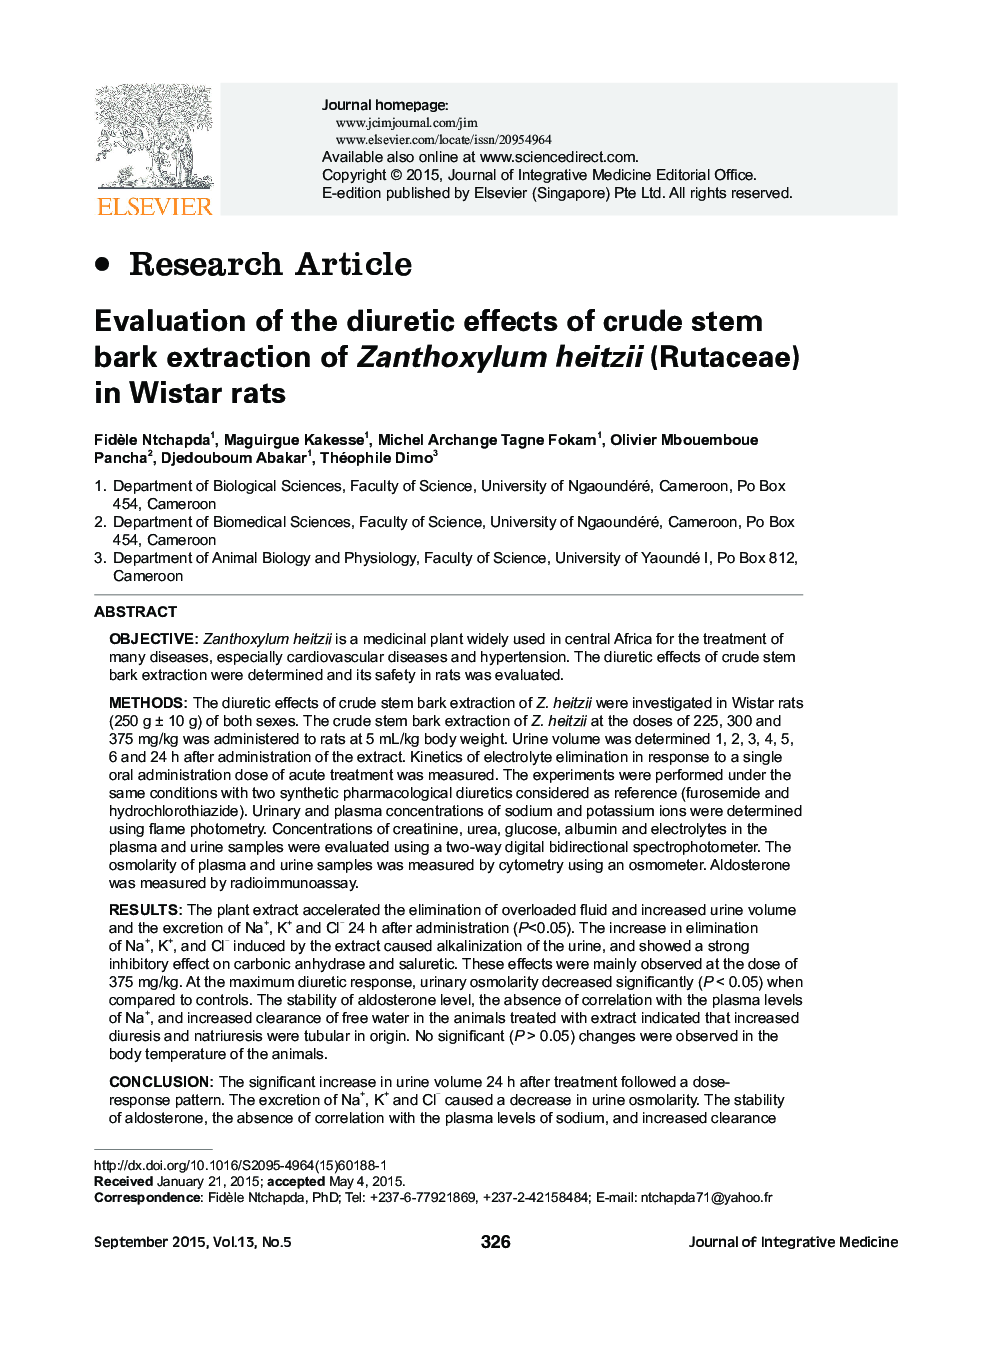 Evaluation of the diuretic effects of crude stem bark extraction of Zanthoxylum heitzii (Rutaceae) in Wistar rats